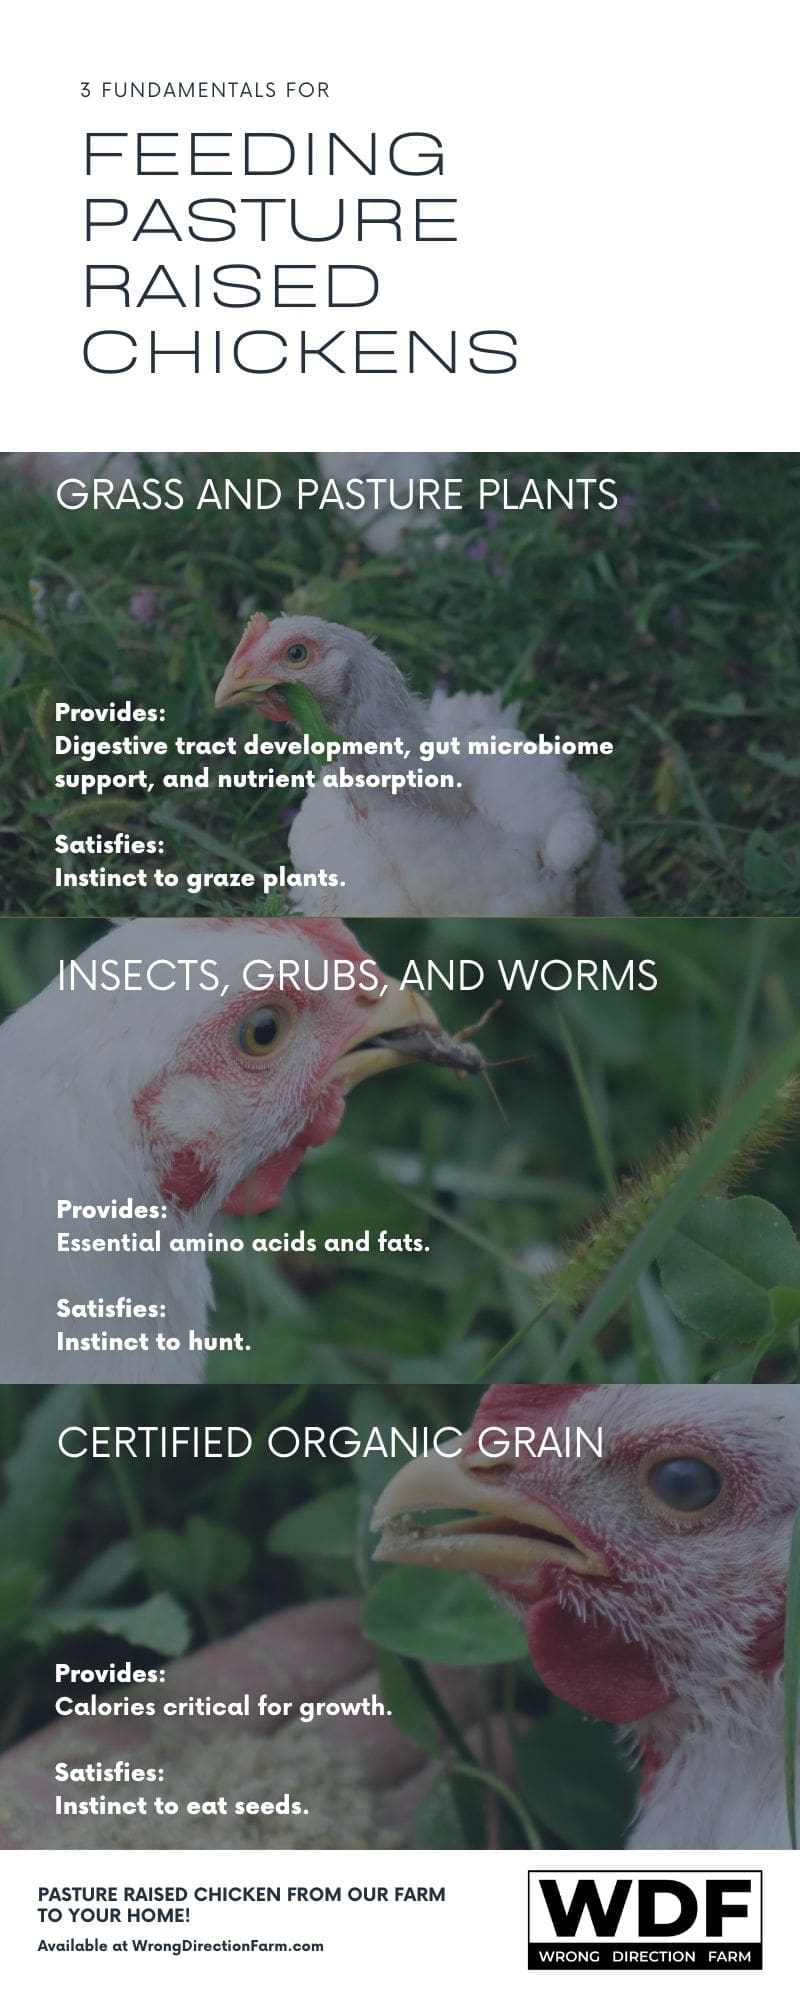 Infographic for the 3 fundamentals of feeding pasture raised chickens at Wrong Direction Farm:  Grass and Pasture Plants, Insect/Grubs/Worms, and Certified Organic Grain.